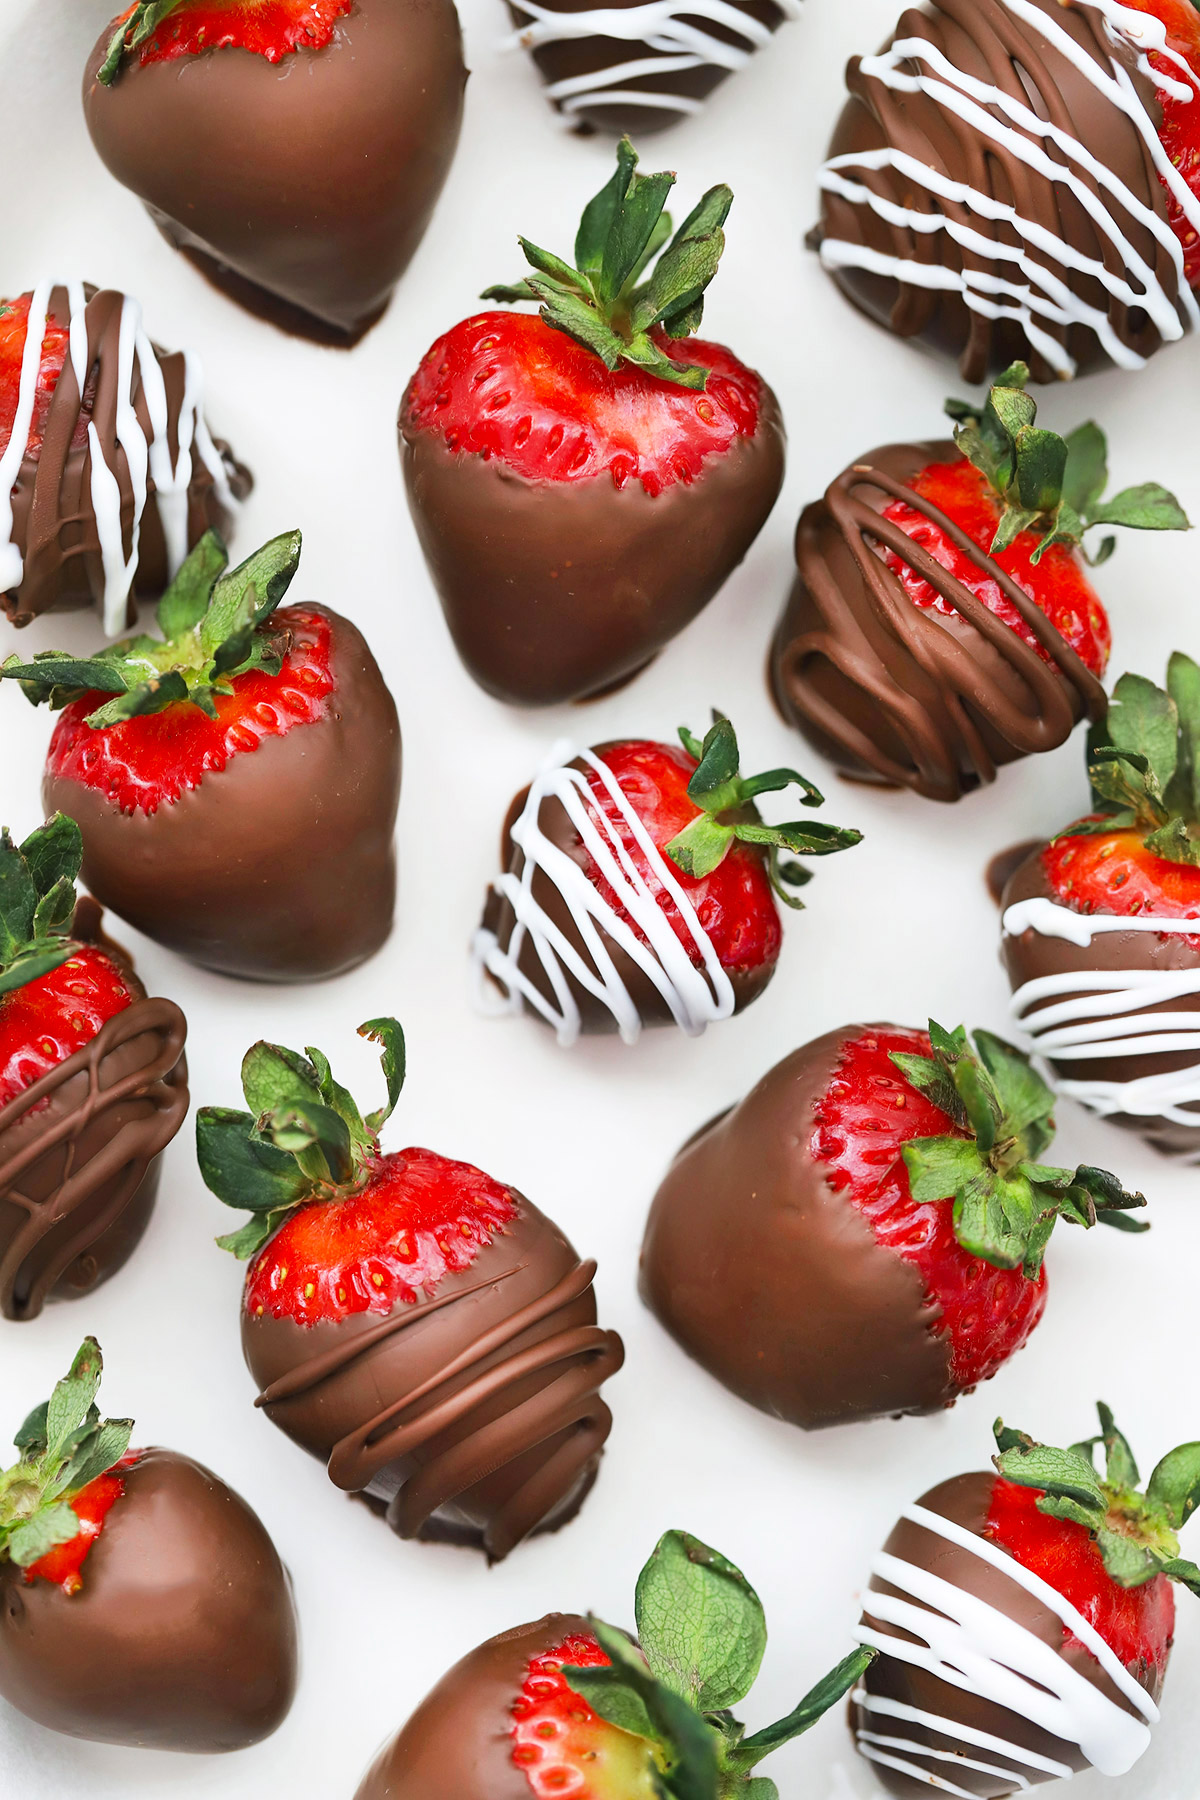 Overhead view of vegan chocolate-covered strawberries on a white background